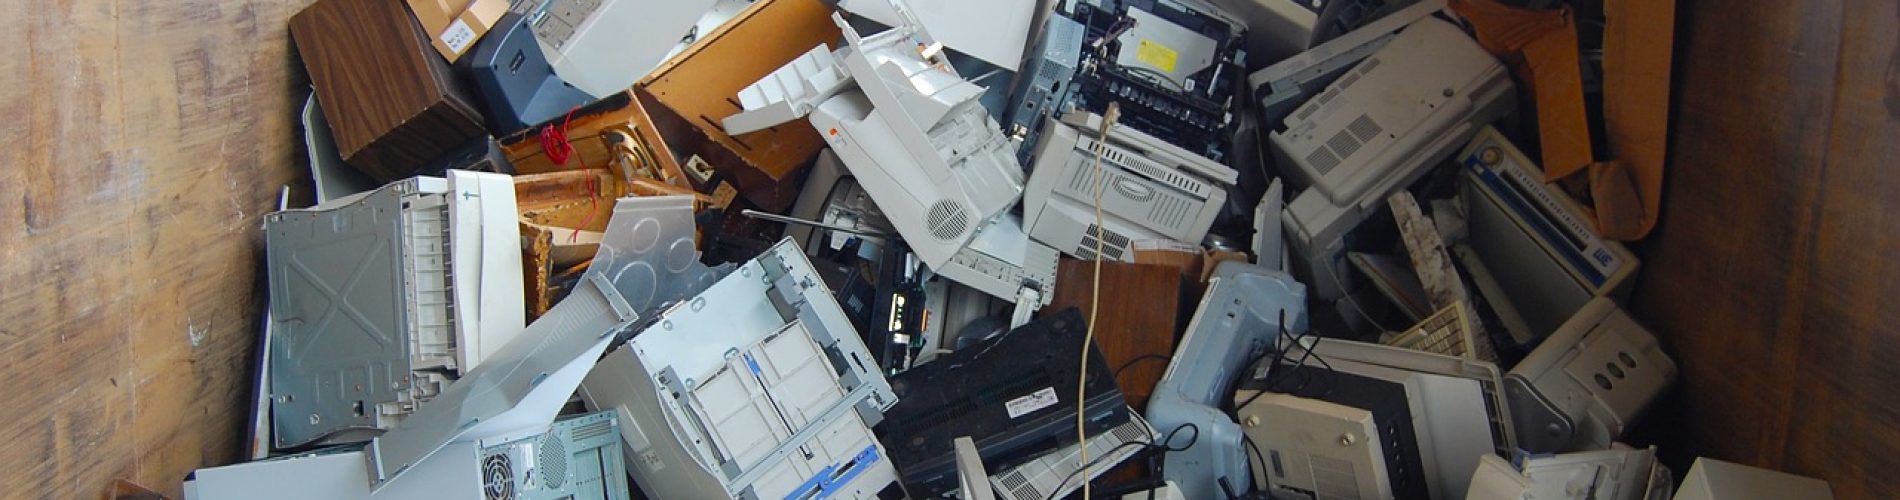 several electronics equipment on recycling site